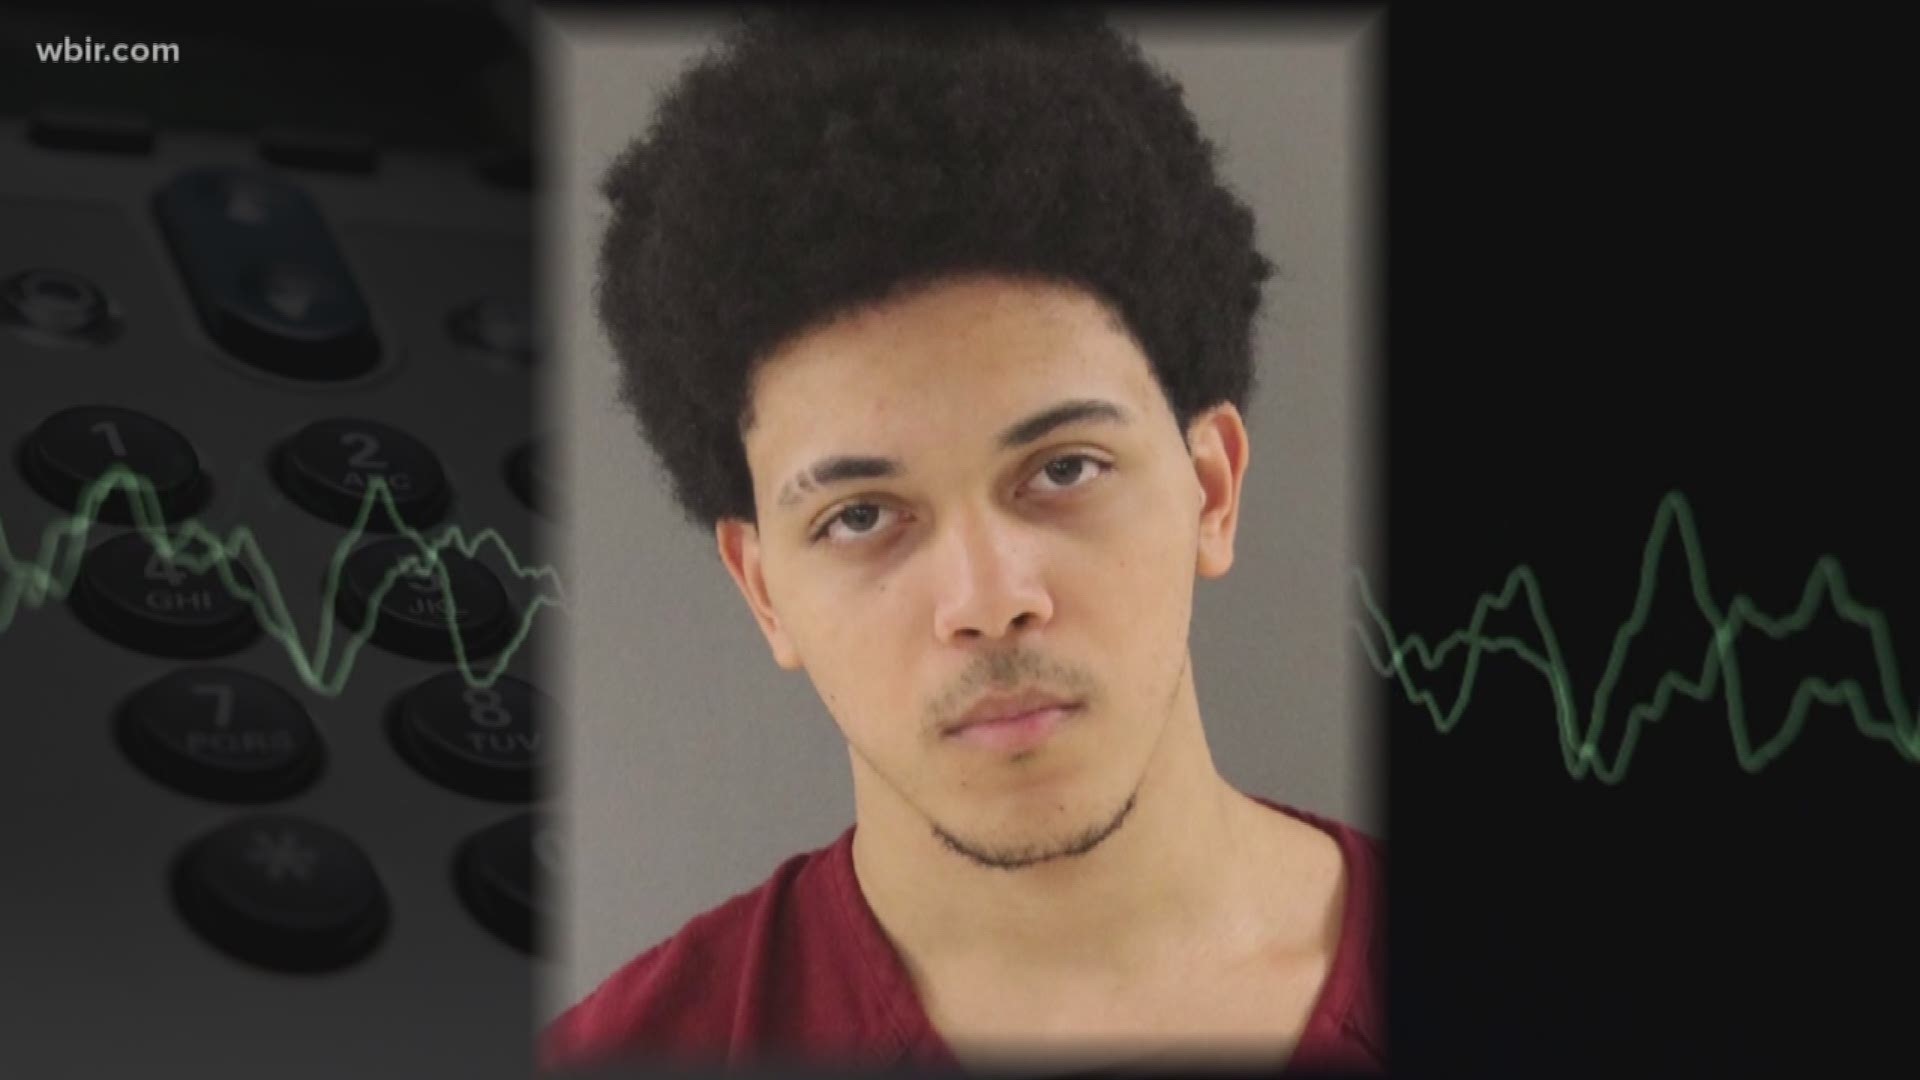 A fight with his girlfriend likely caused a man already suffering from mental health issues to randomly shoot two people at a Sevierville outlet mall, according to investigators. Police say Leon Steven Jones, Jr. shot two strangers, one fatally, before killing himself.